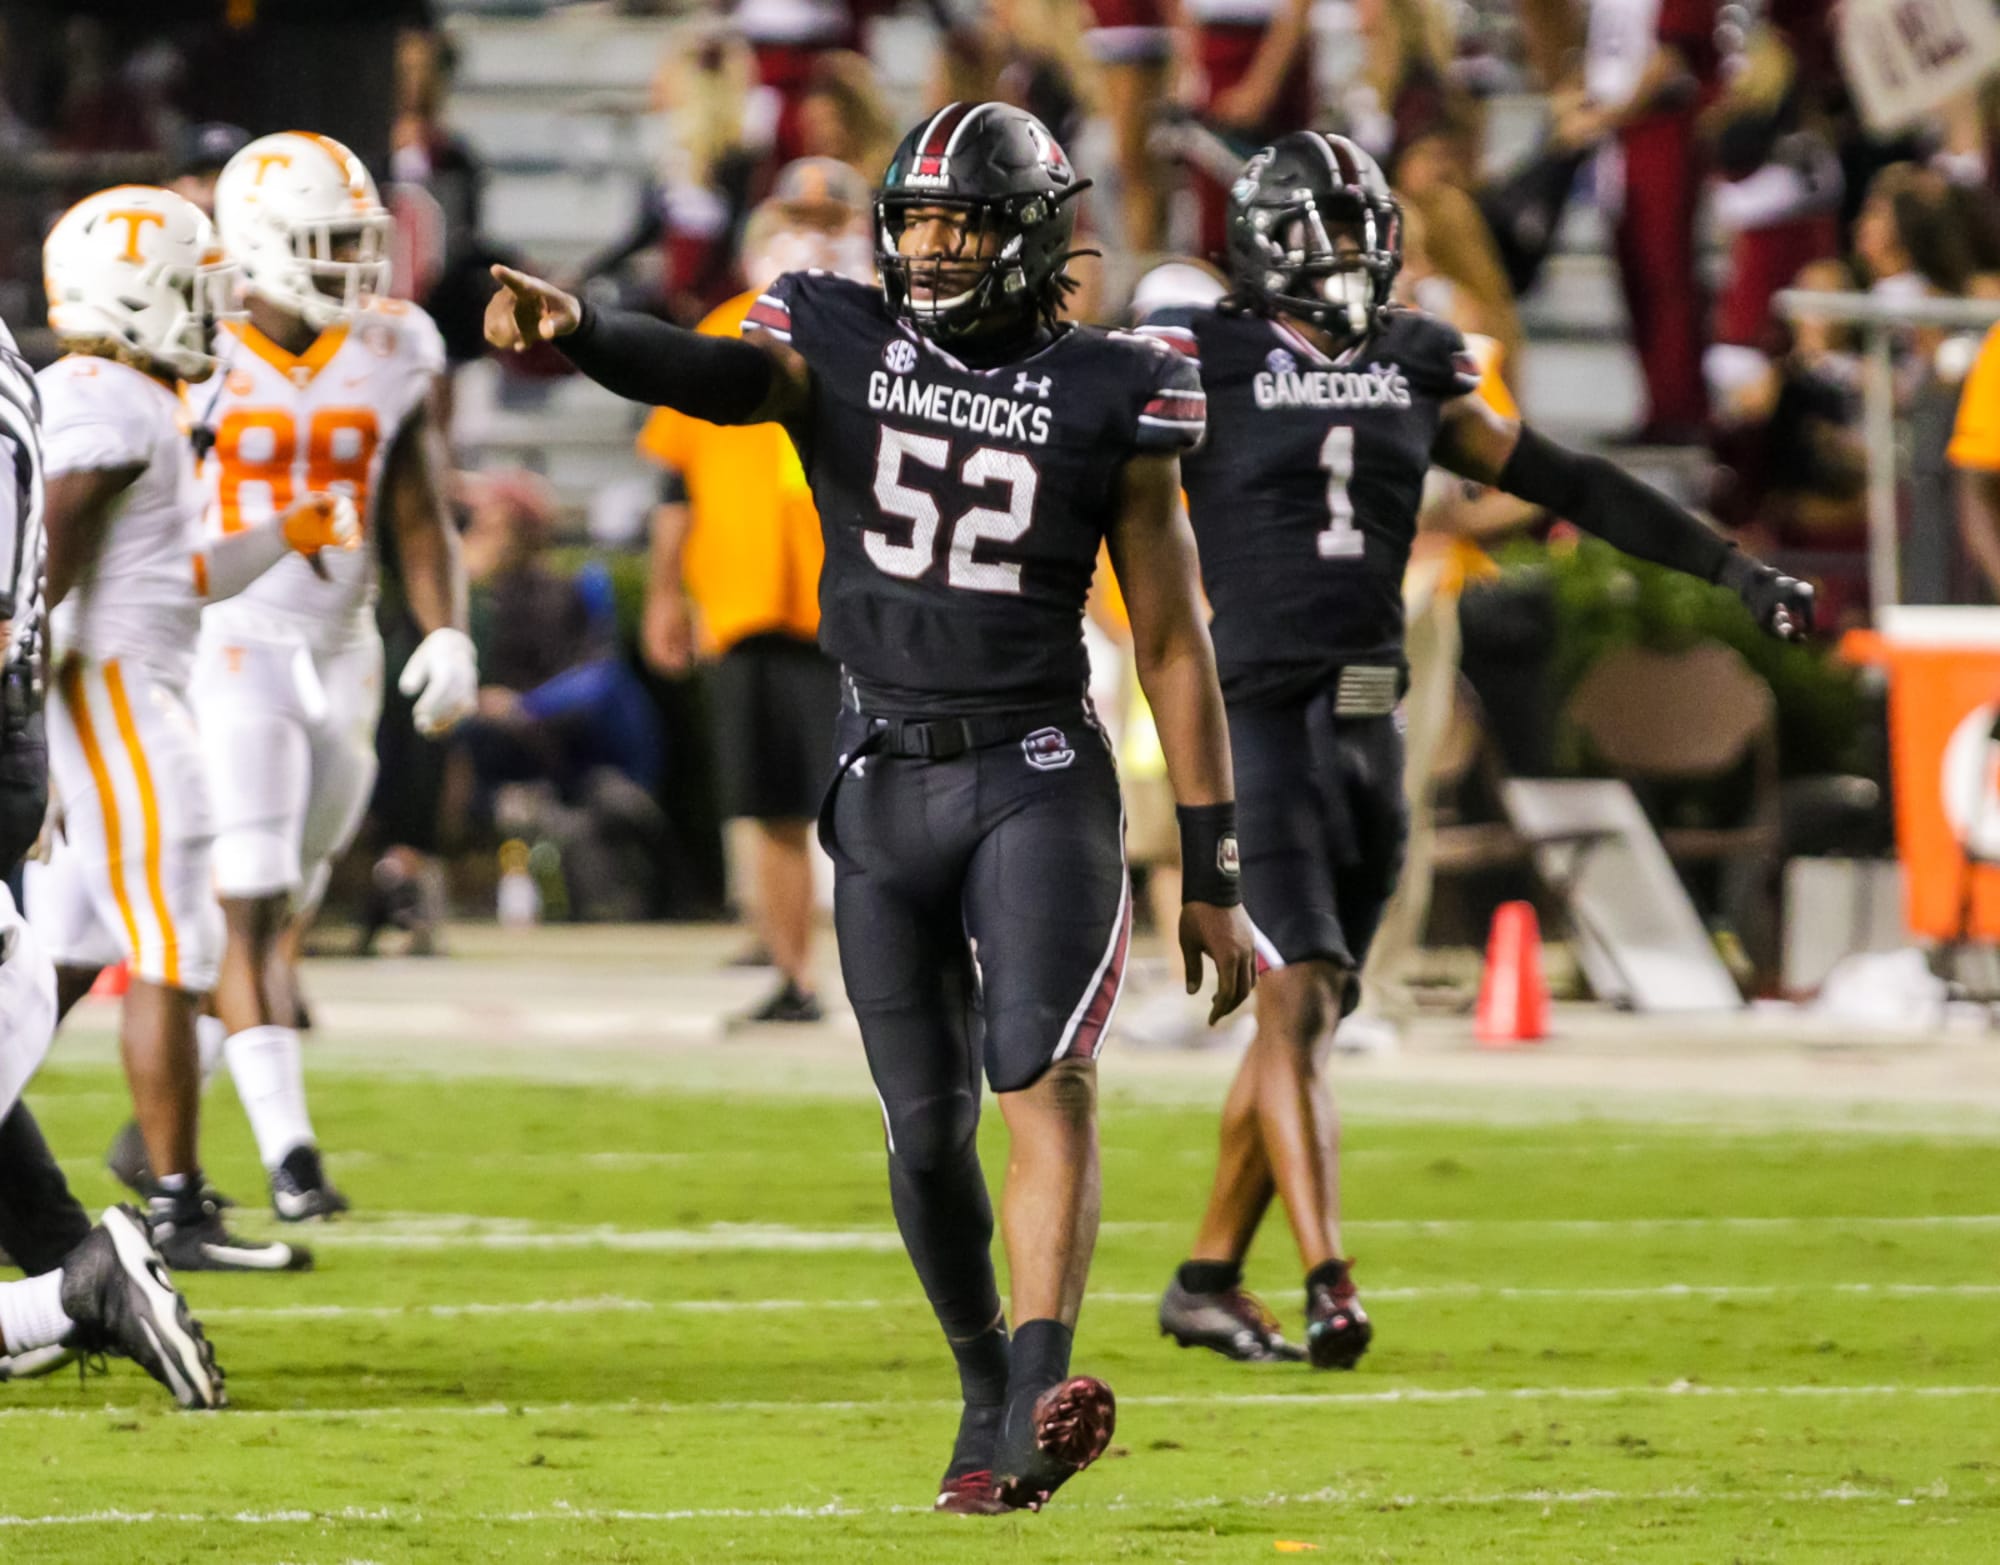 South Carolina football: two players ranked in top